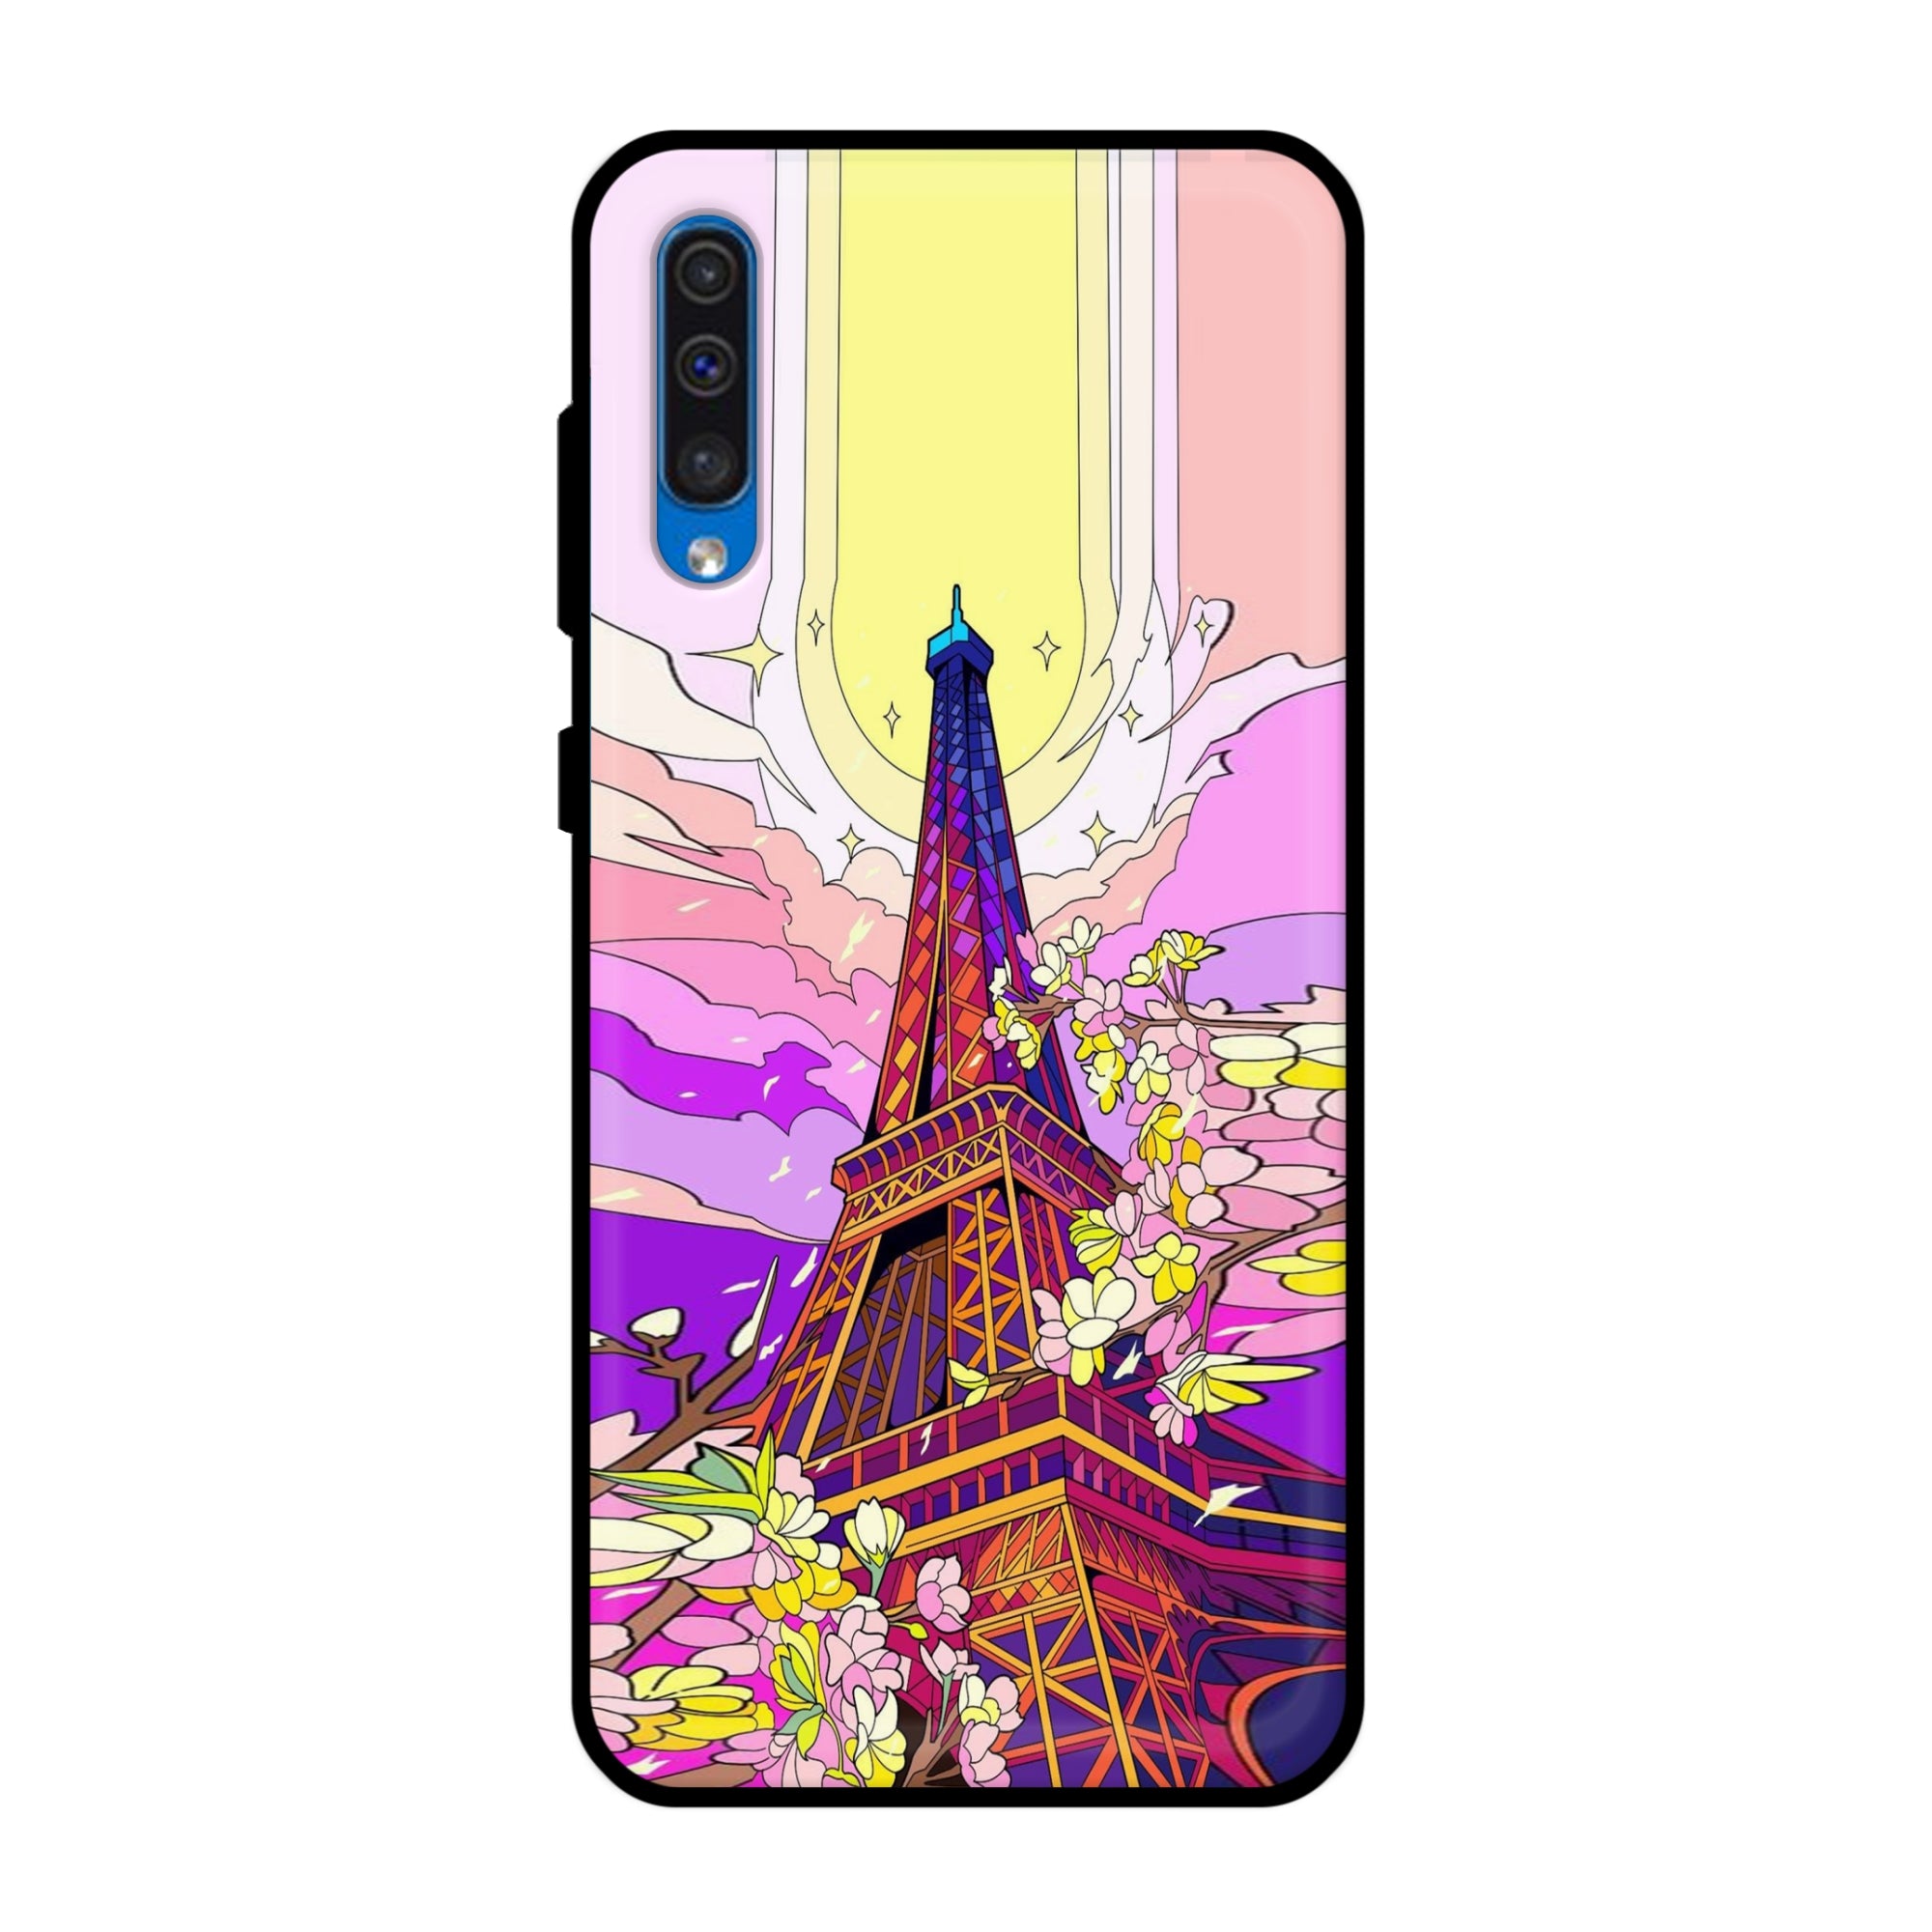 Buy Eiffel Tower Metal-Silicon Back Mobile Phone Case/Cover For Samsung Galaxy A50 / A50s / A30s Online